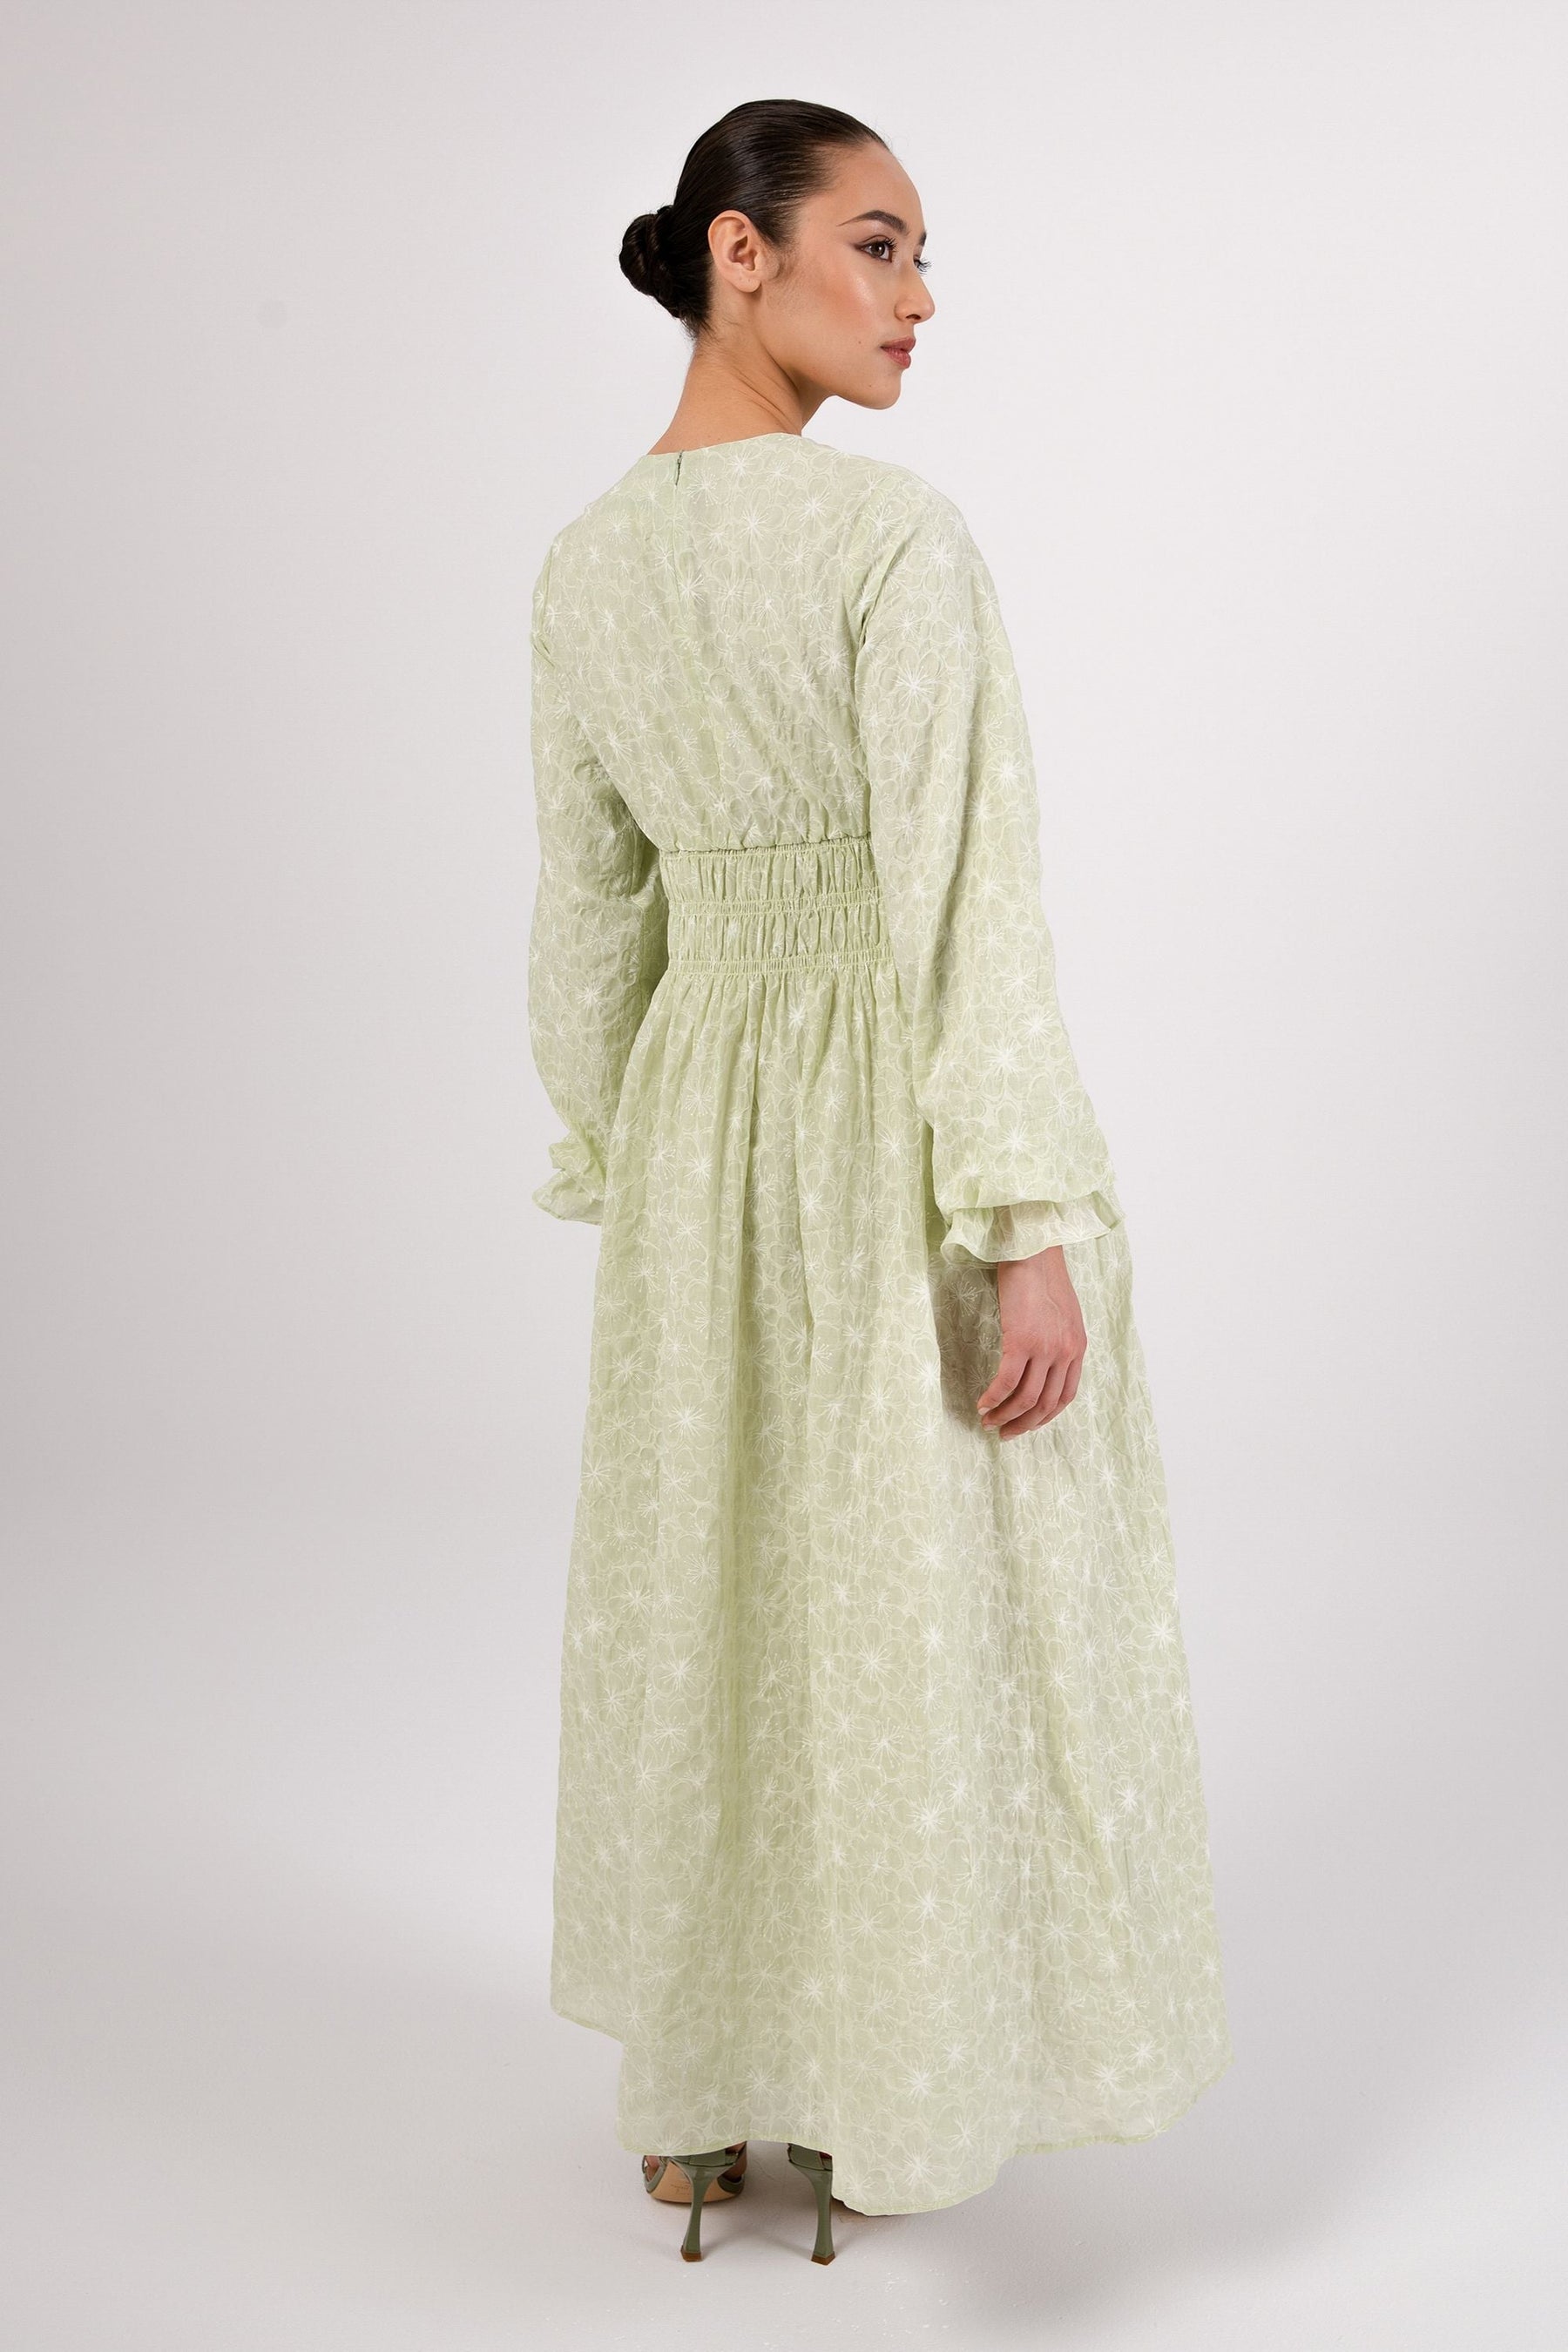 Marwa Green Floral Rouched Maxi Dress epschoolboard 